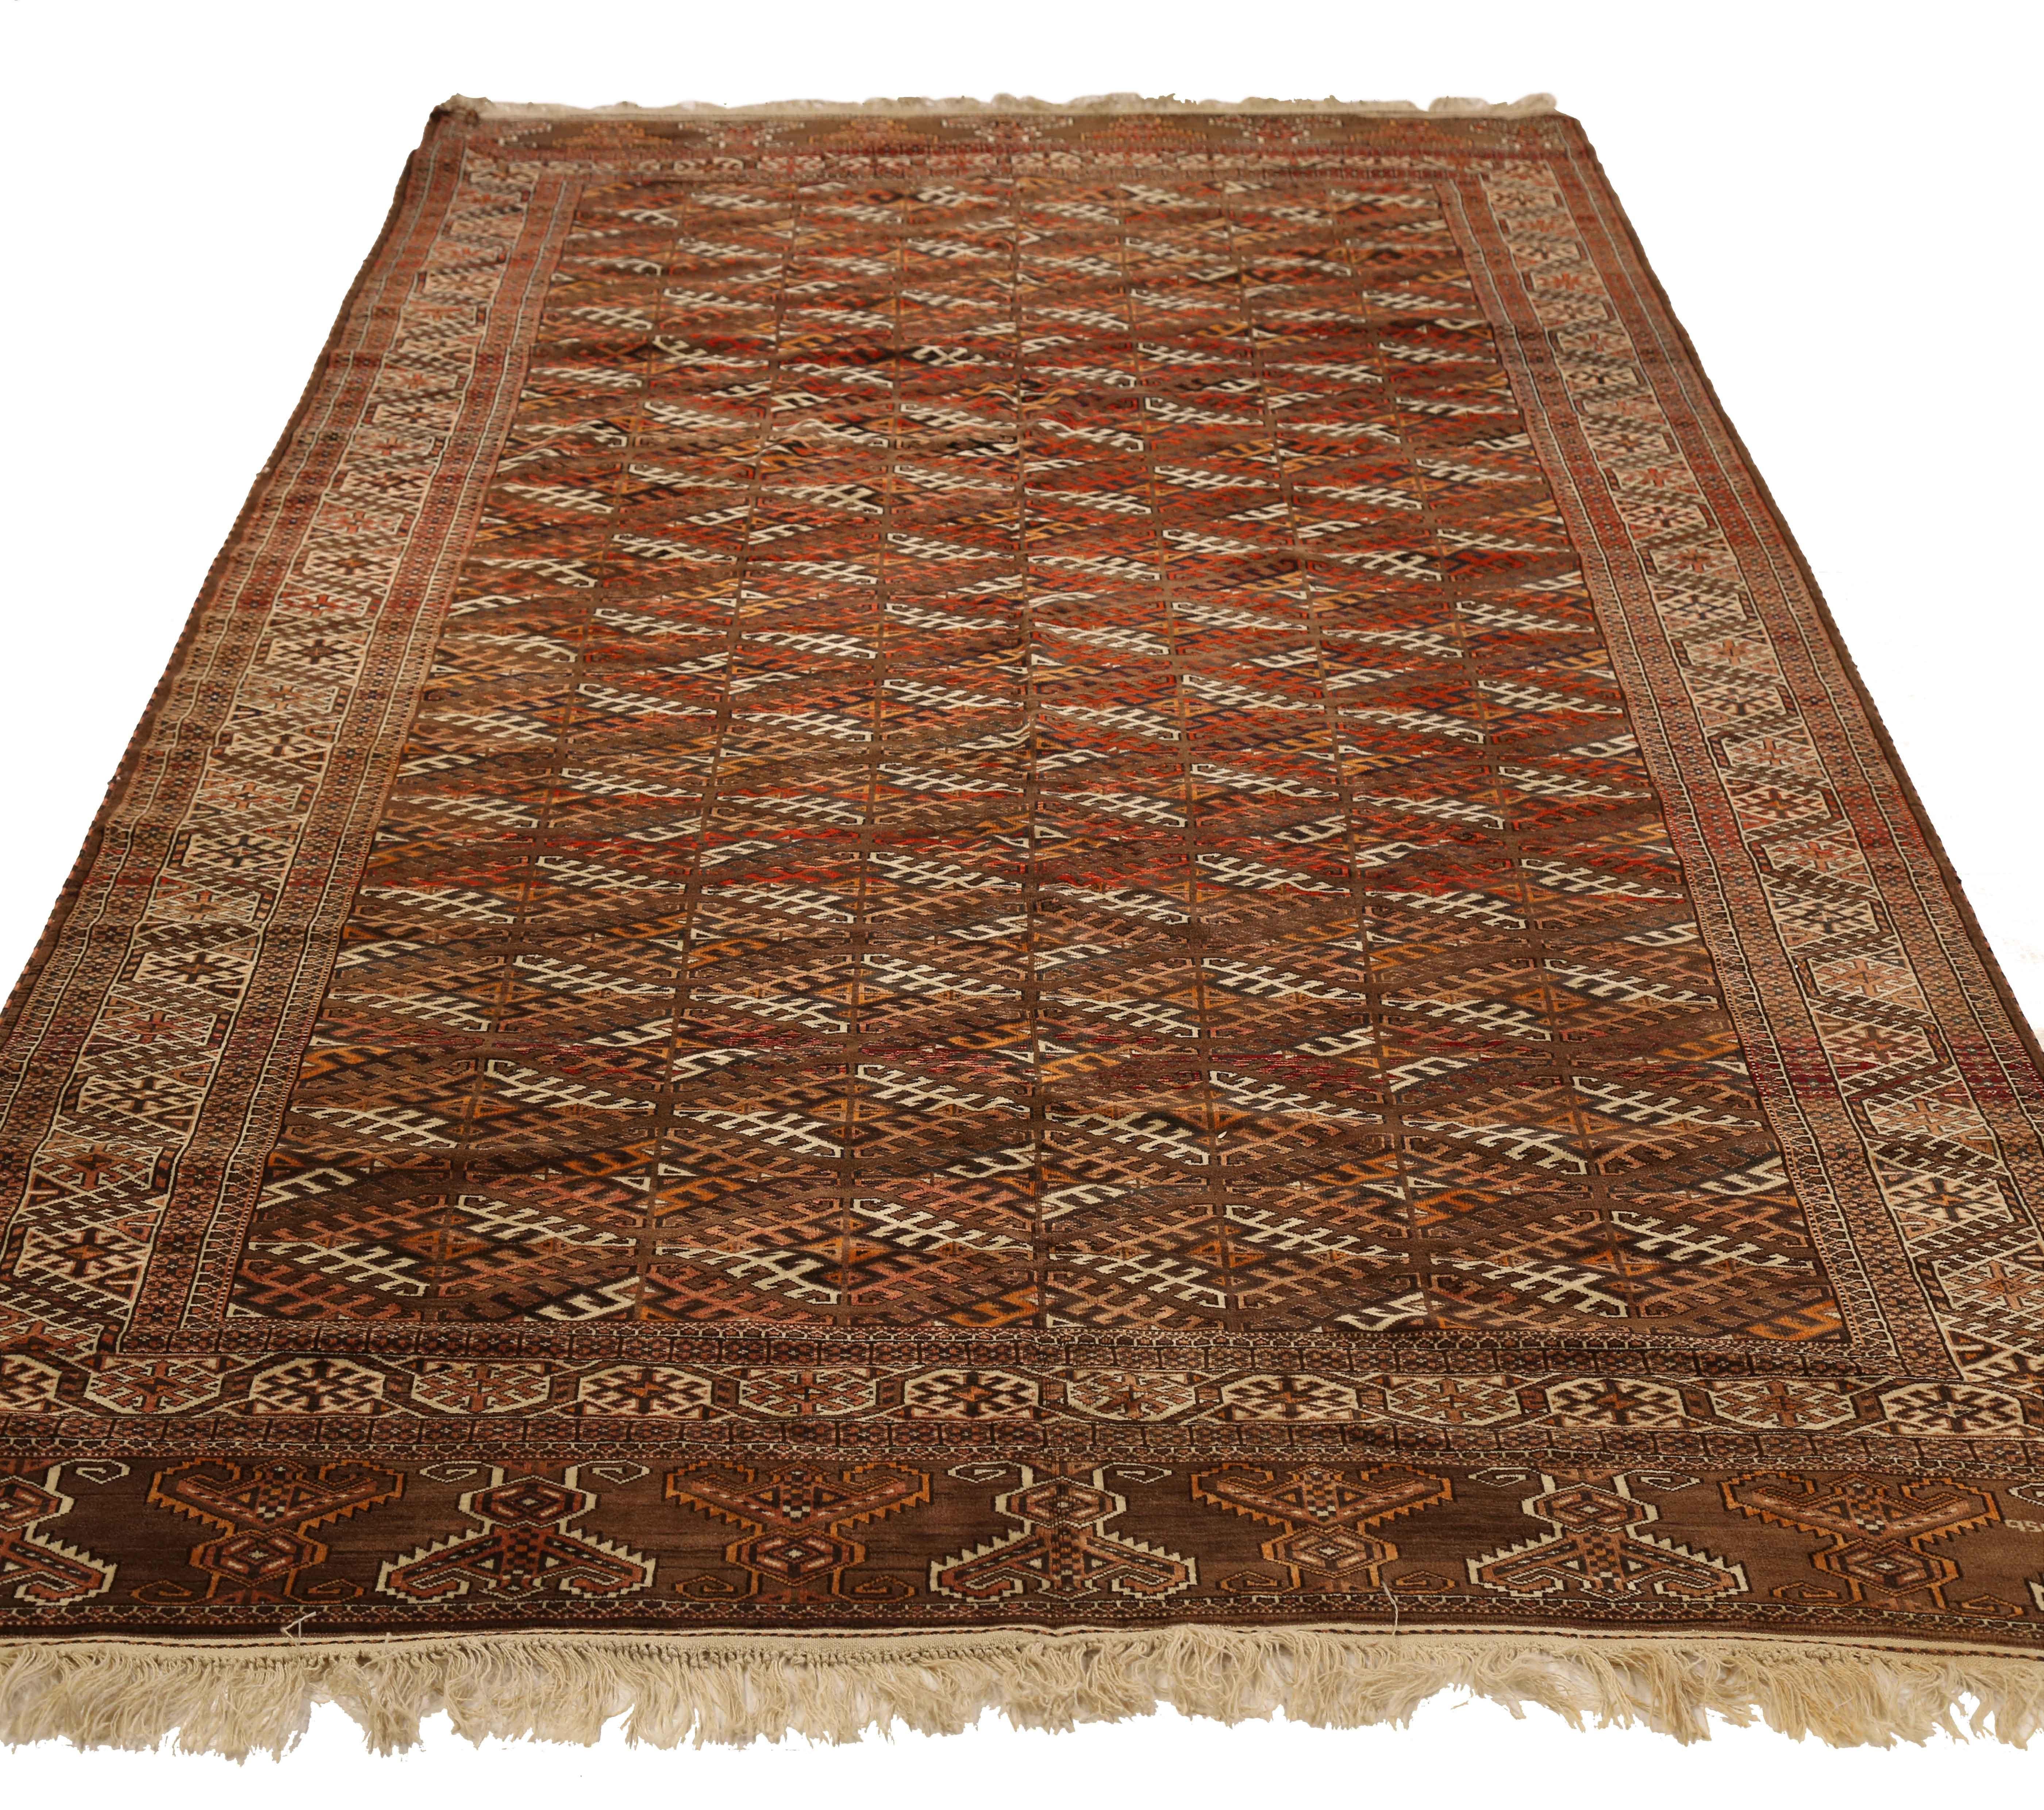 Antique Persian rug handwoven from the finest sheep’s wool and colored with all-natural vegetable dyes that are safe for humans and pets. It’s a traditional Turkmen design featuring diamond details in black, white and brown over a deep red field. It